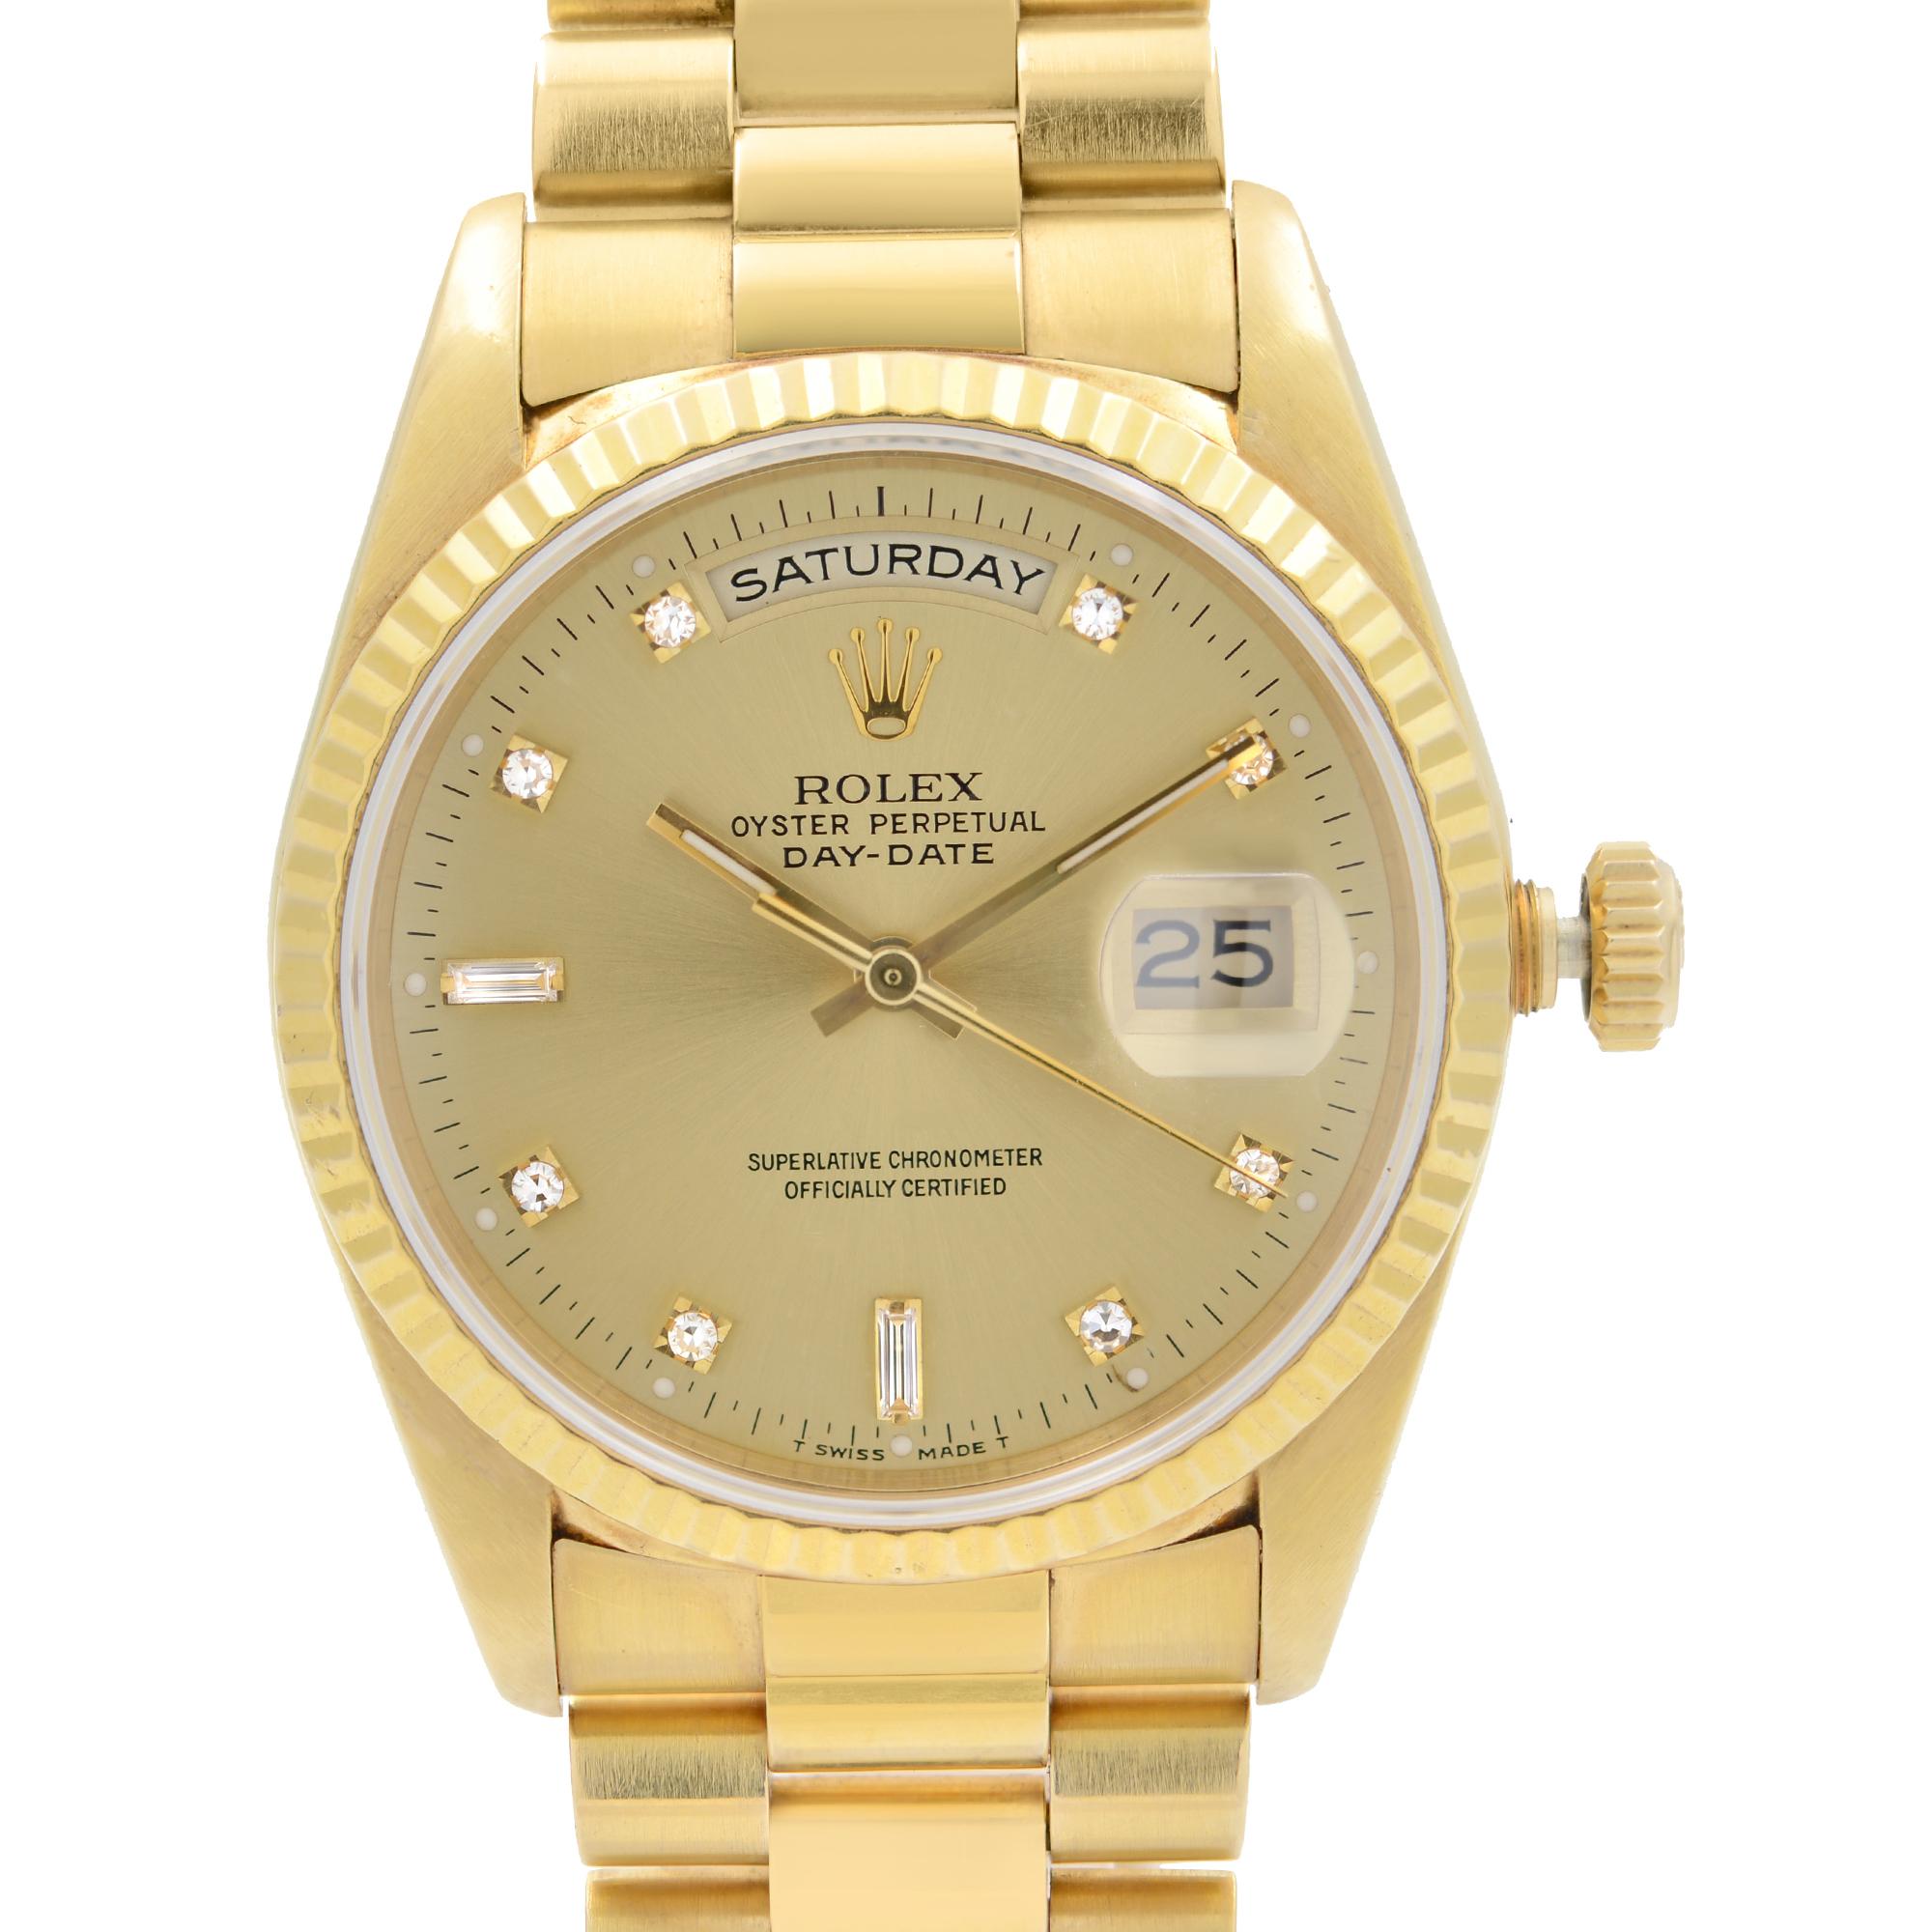 Rolex President Day-Date 36mm 18K Yellow Gold Champagne factory Diamond Dial Men's Watch 18238, This Beautiful Timepiece was Produced in 1991 & is Powered by Mechanical (Automatic) Movement And Features: Round 18k Gold Case With an 18k Gold